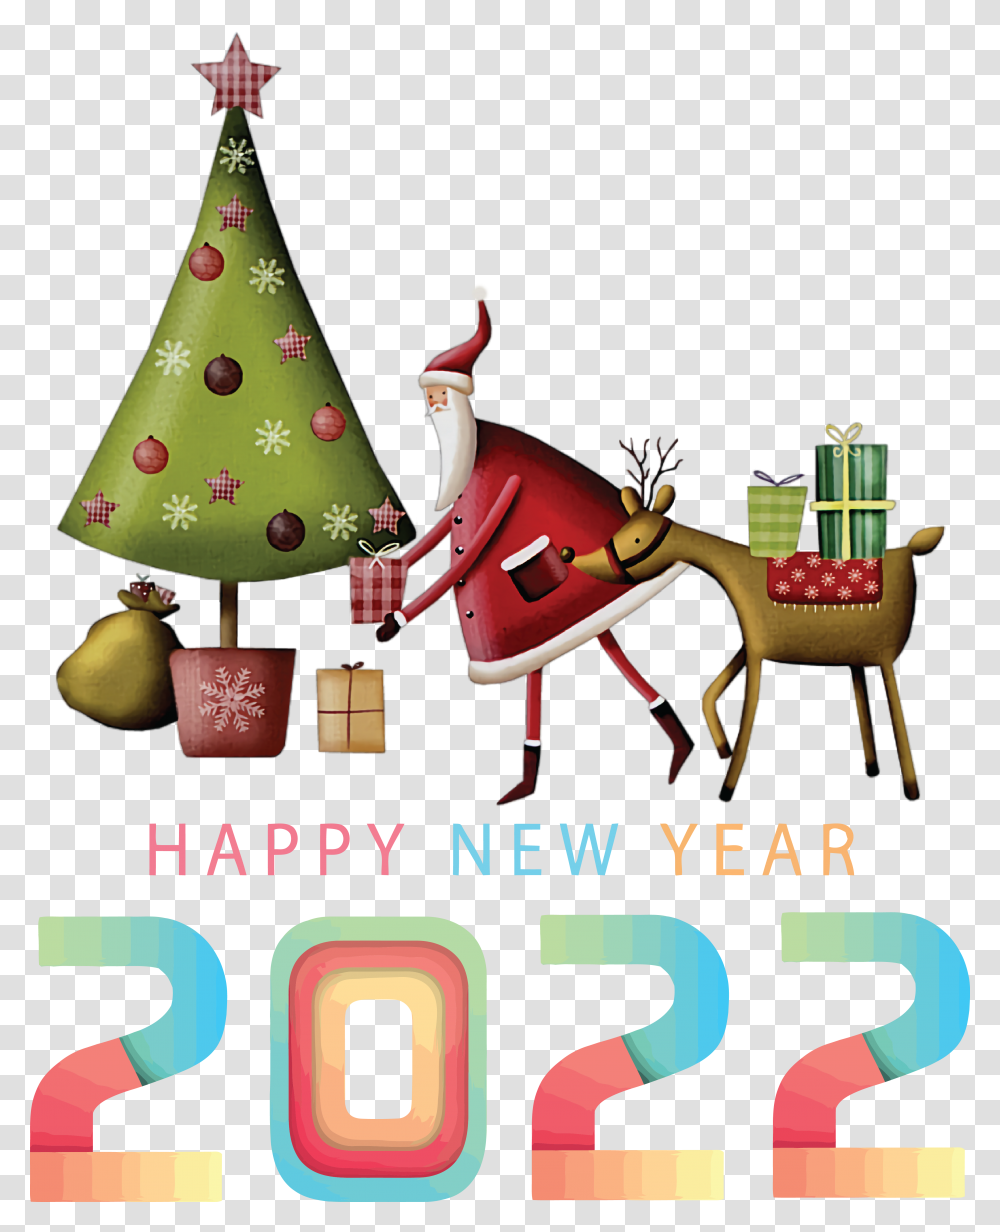 Bronners Christmas Wonderland New Year Mrs Claus For New Year 2022, Clothing, Apparel, Text, Party Hat Transparent Png